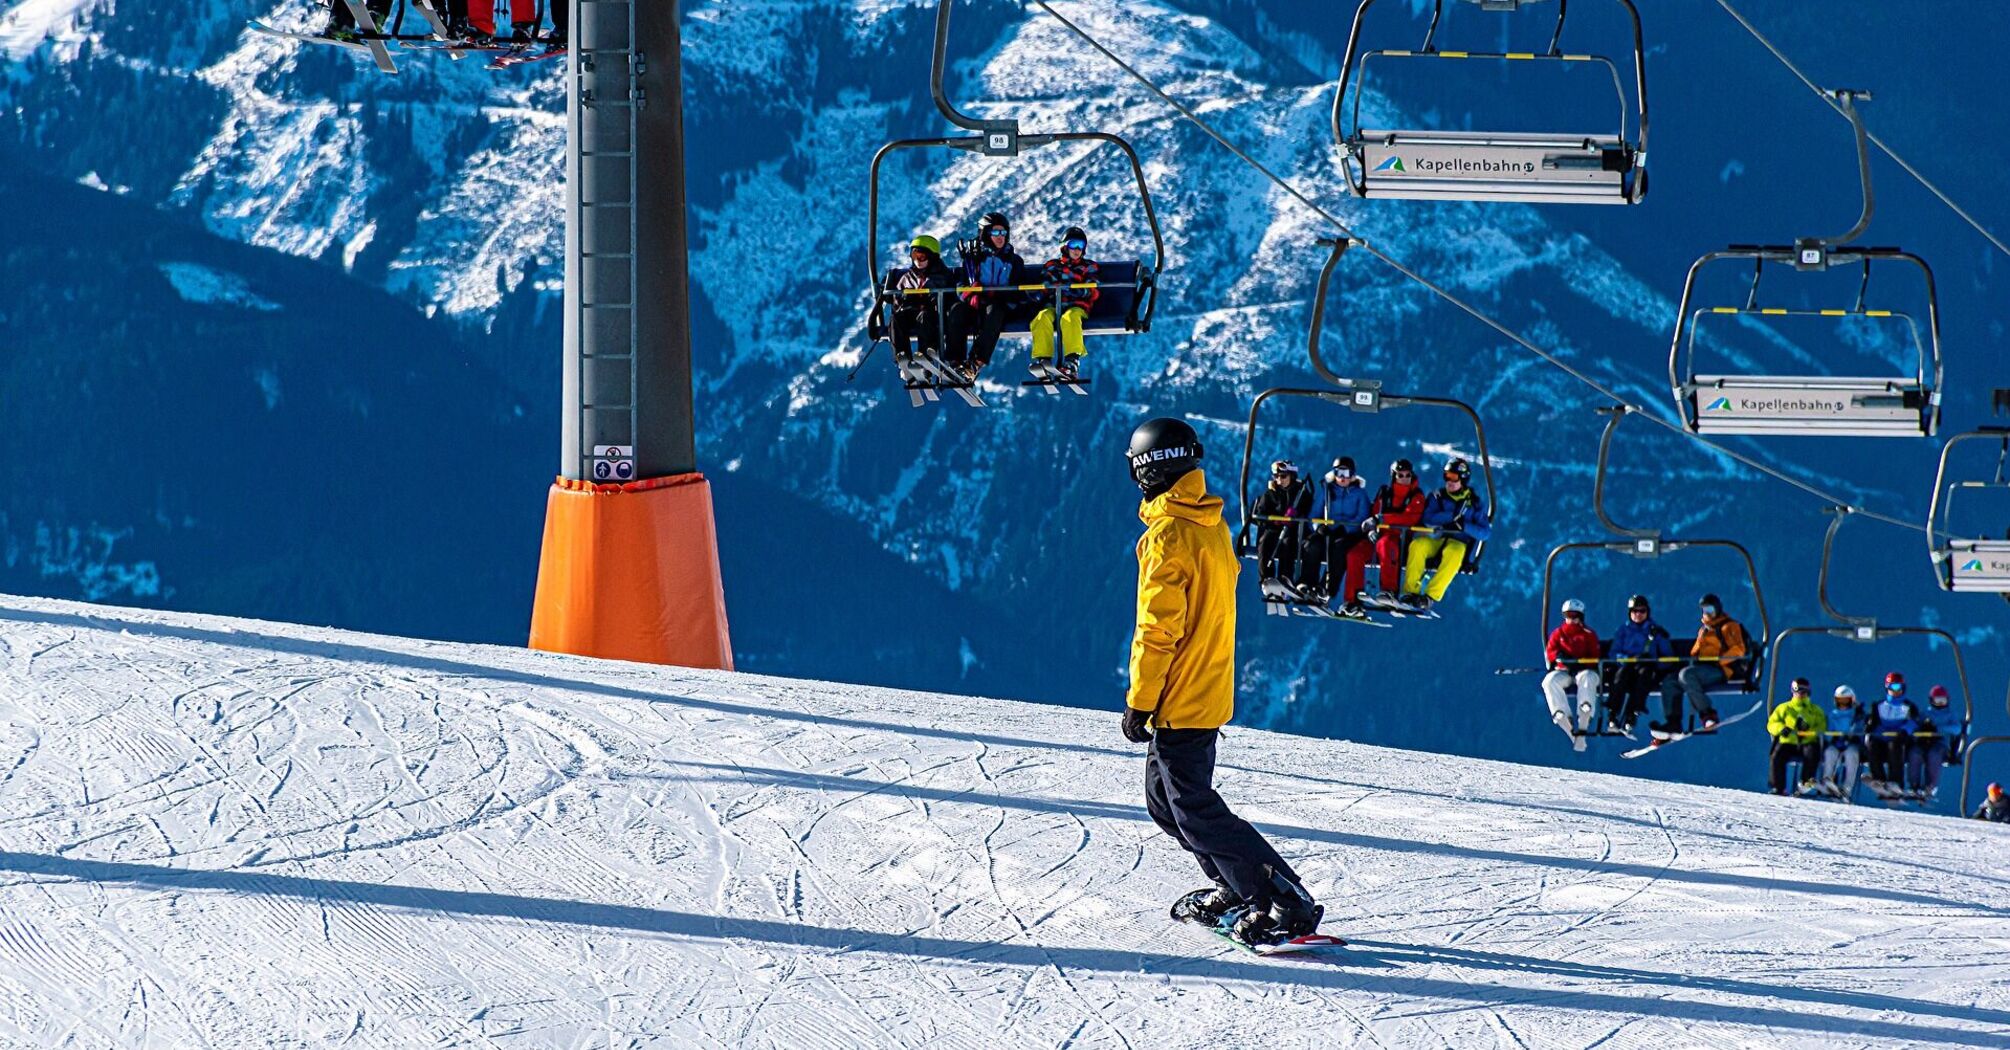 Snowboarder gliding down a snowy mountain slope with a ski lift carrying skiers in the background